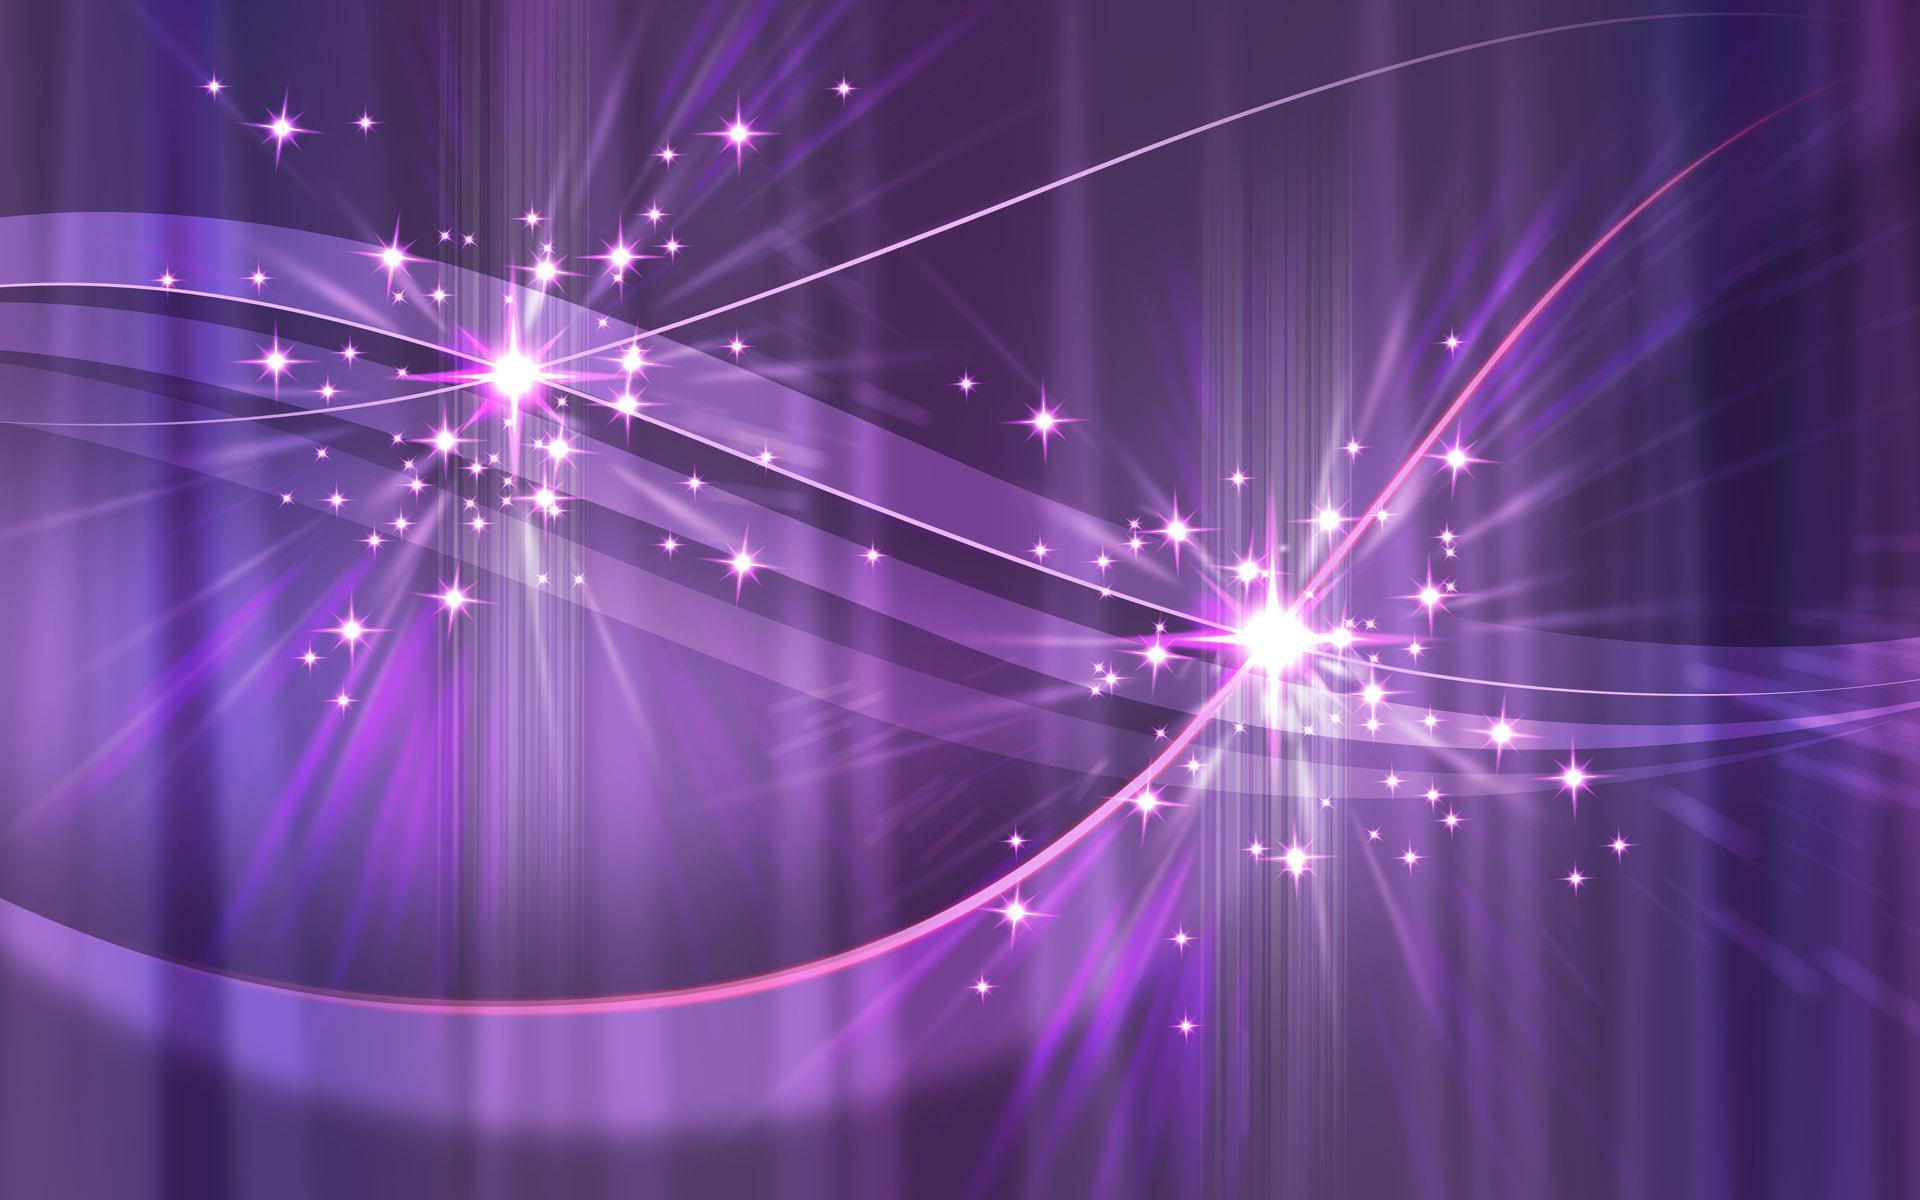 Abstract purple color : Desktop and mobile wallpapers : Wallippo